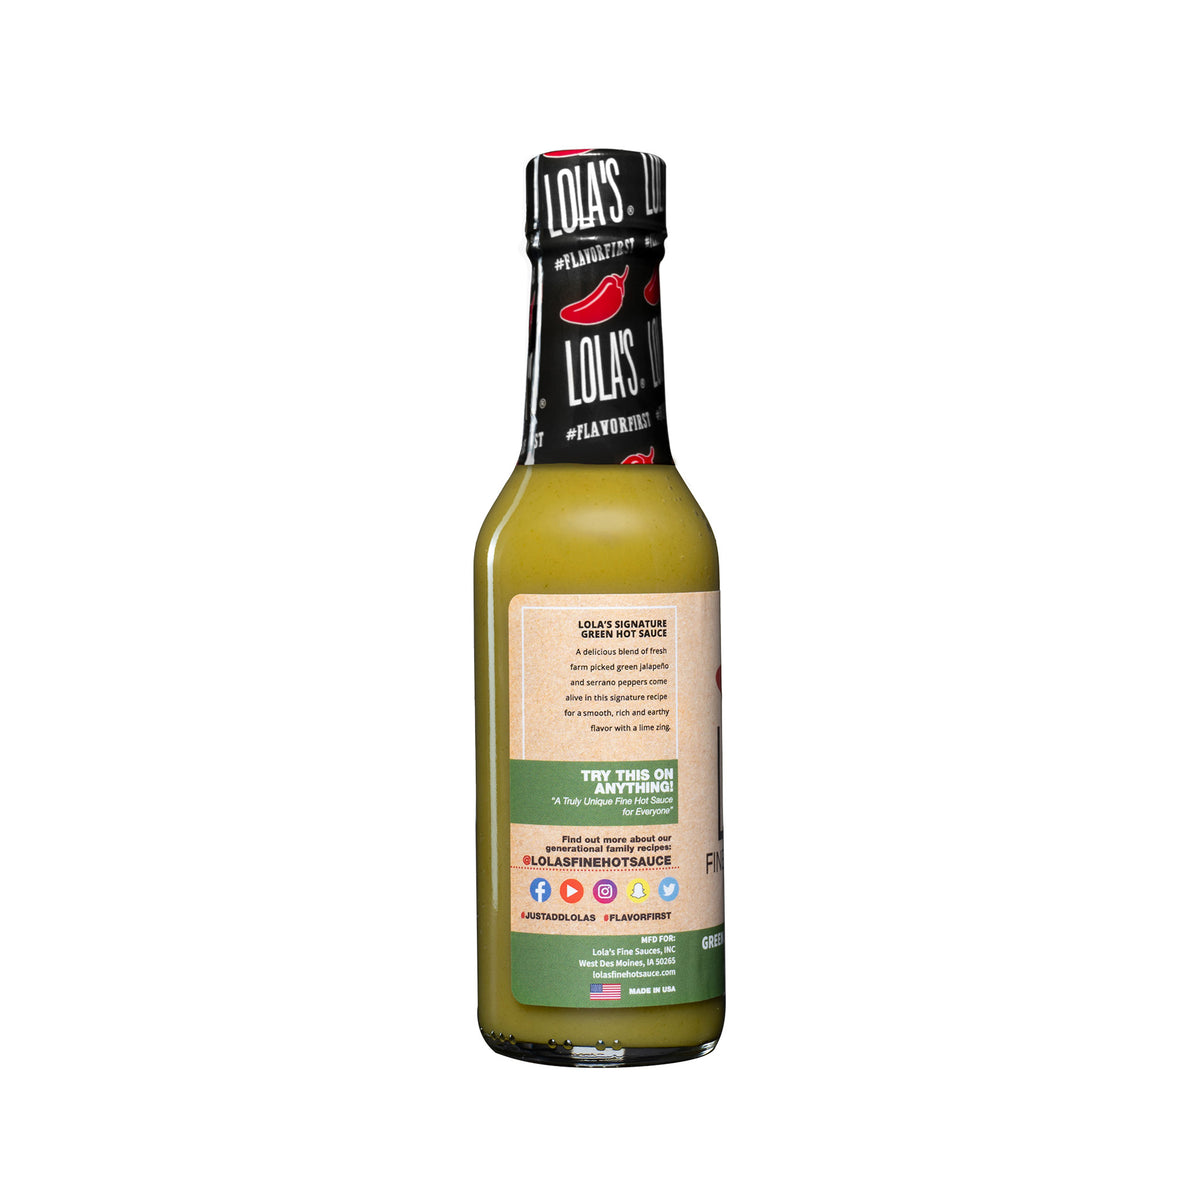 Lola's Green Jalapeño and Serrano Sauce, a 5 oz. glass bottle of hot sauce with a smooth, rich flavor and a lime zing.